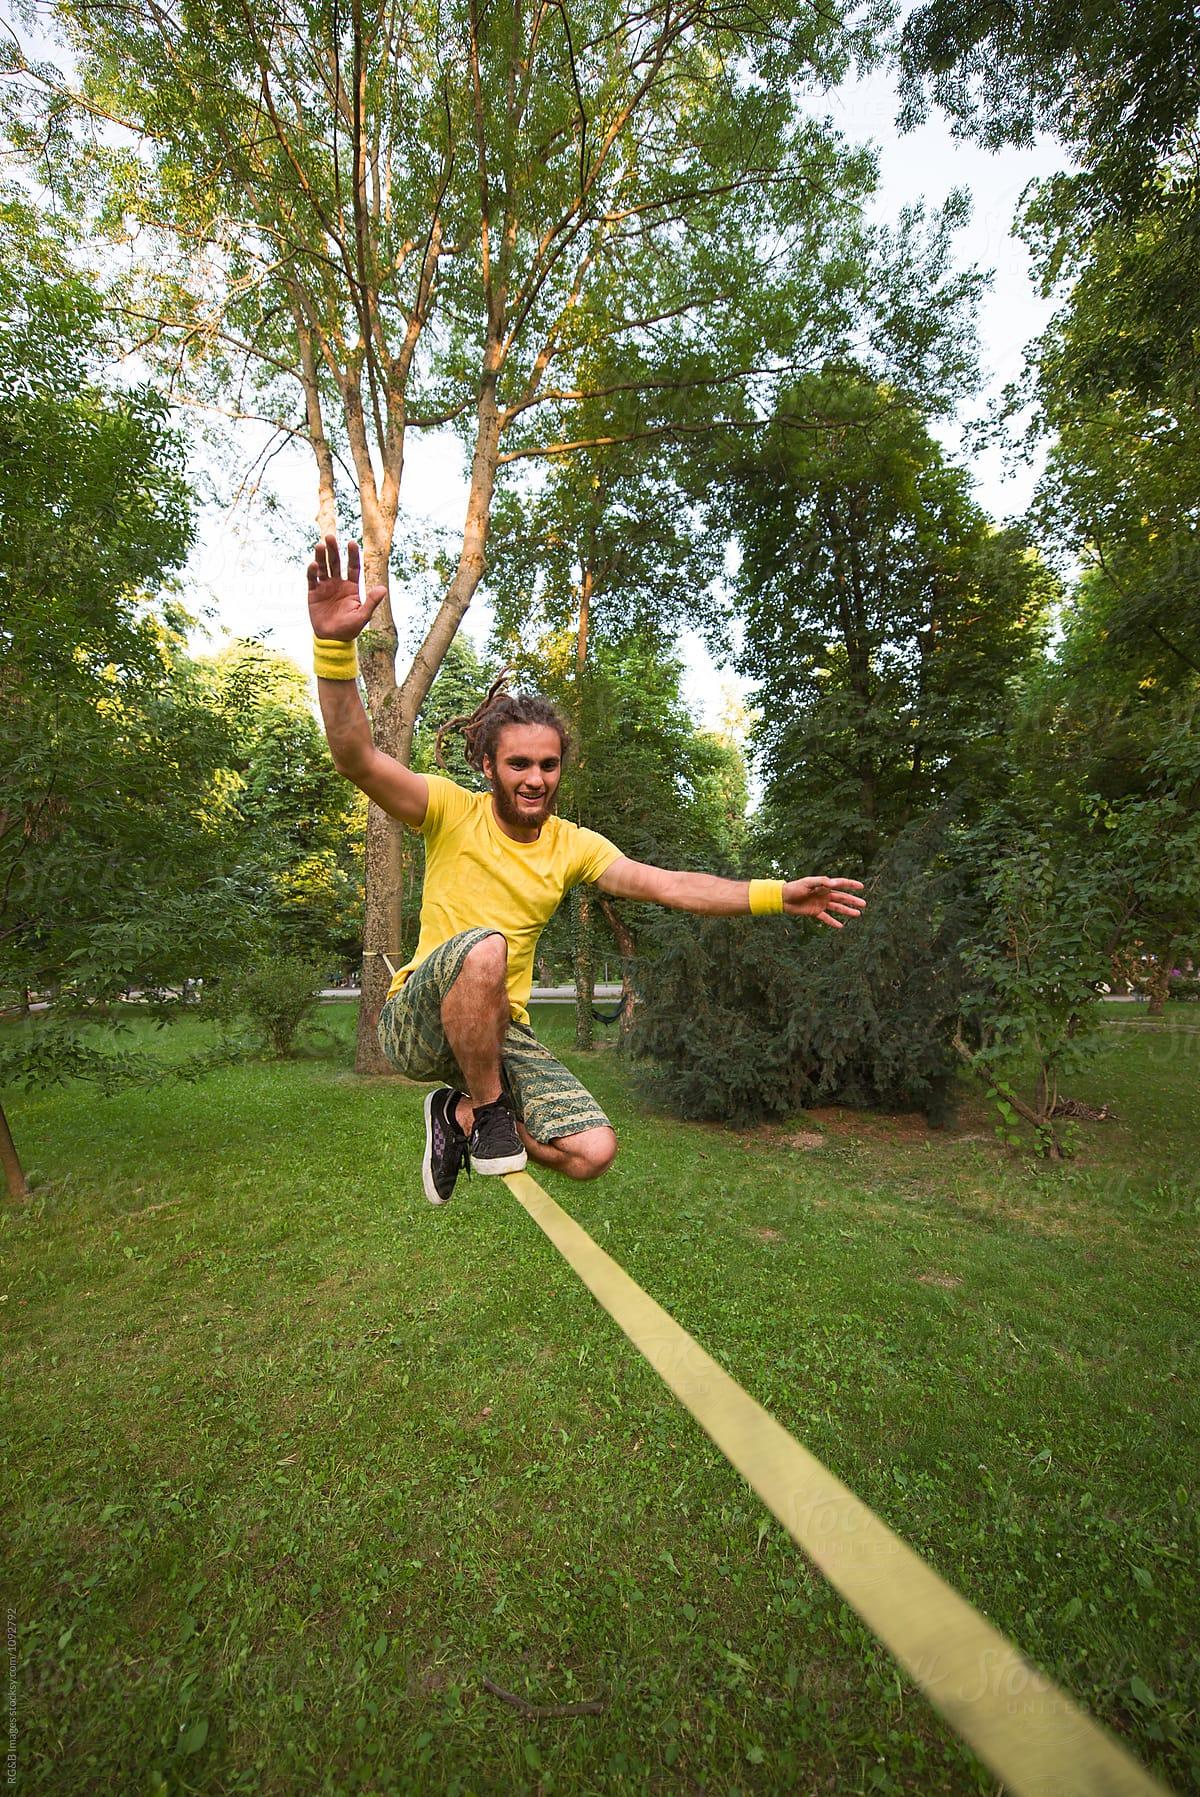 Hipster doing tricks on a slackline in the park by RG&B